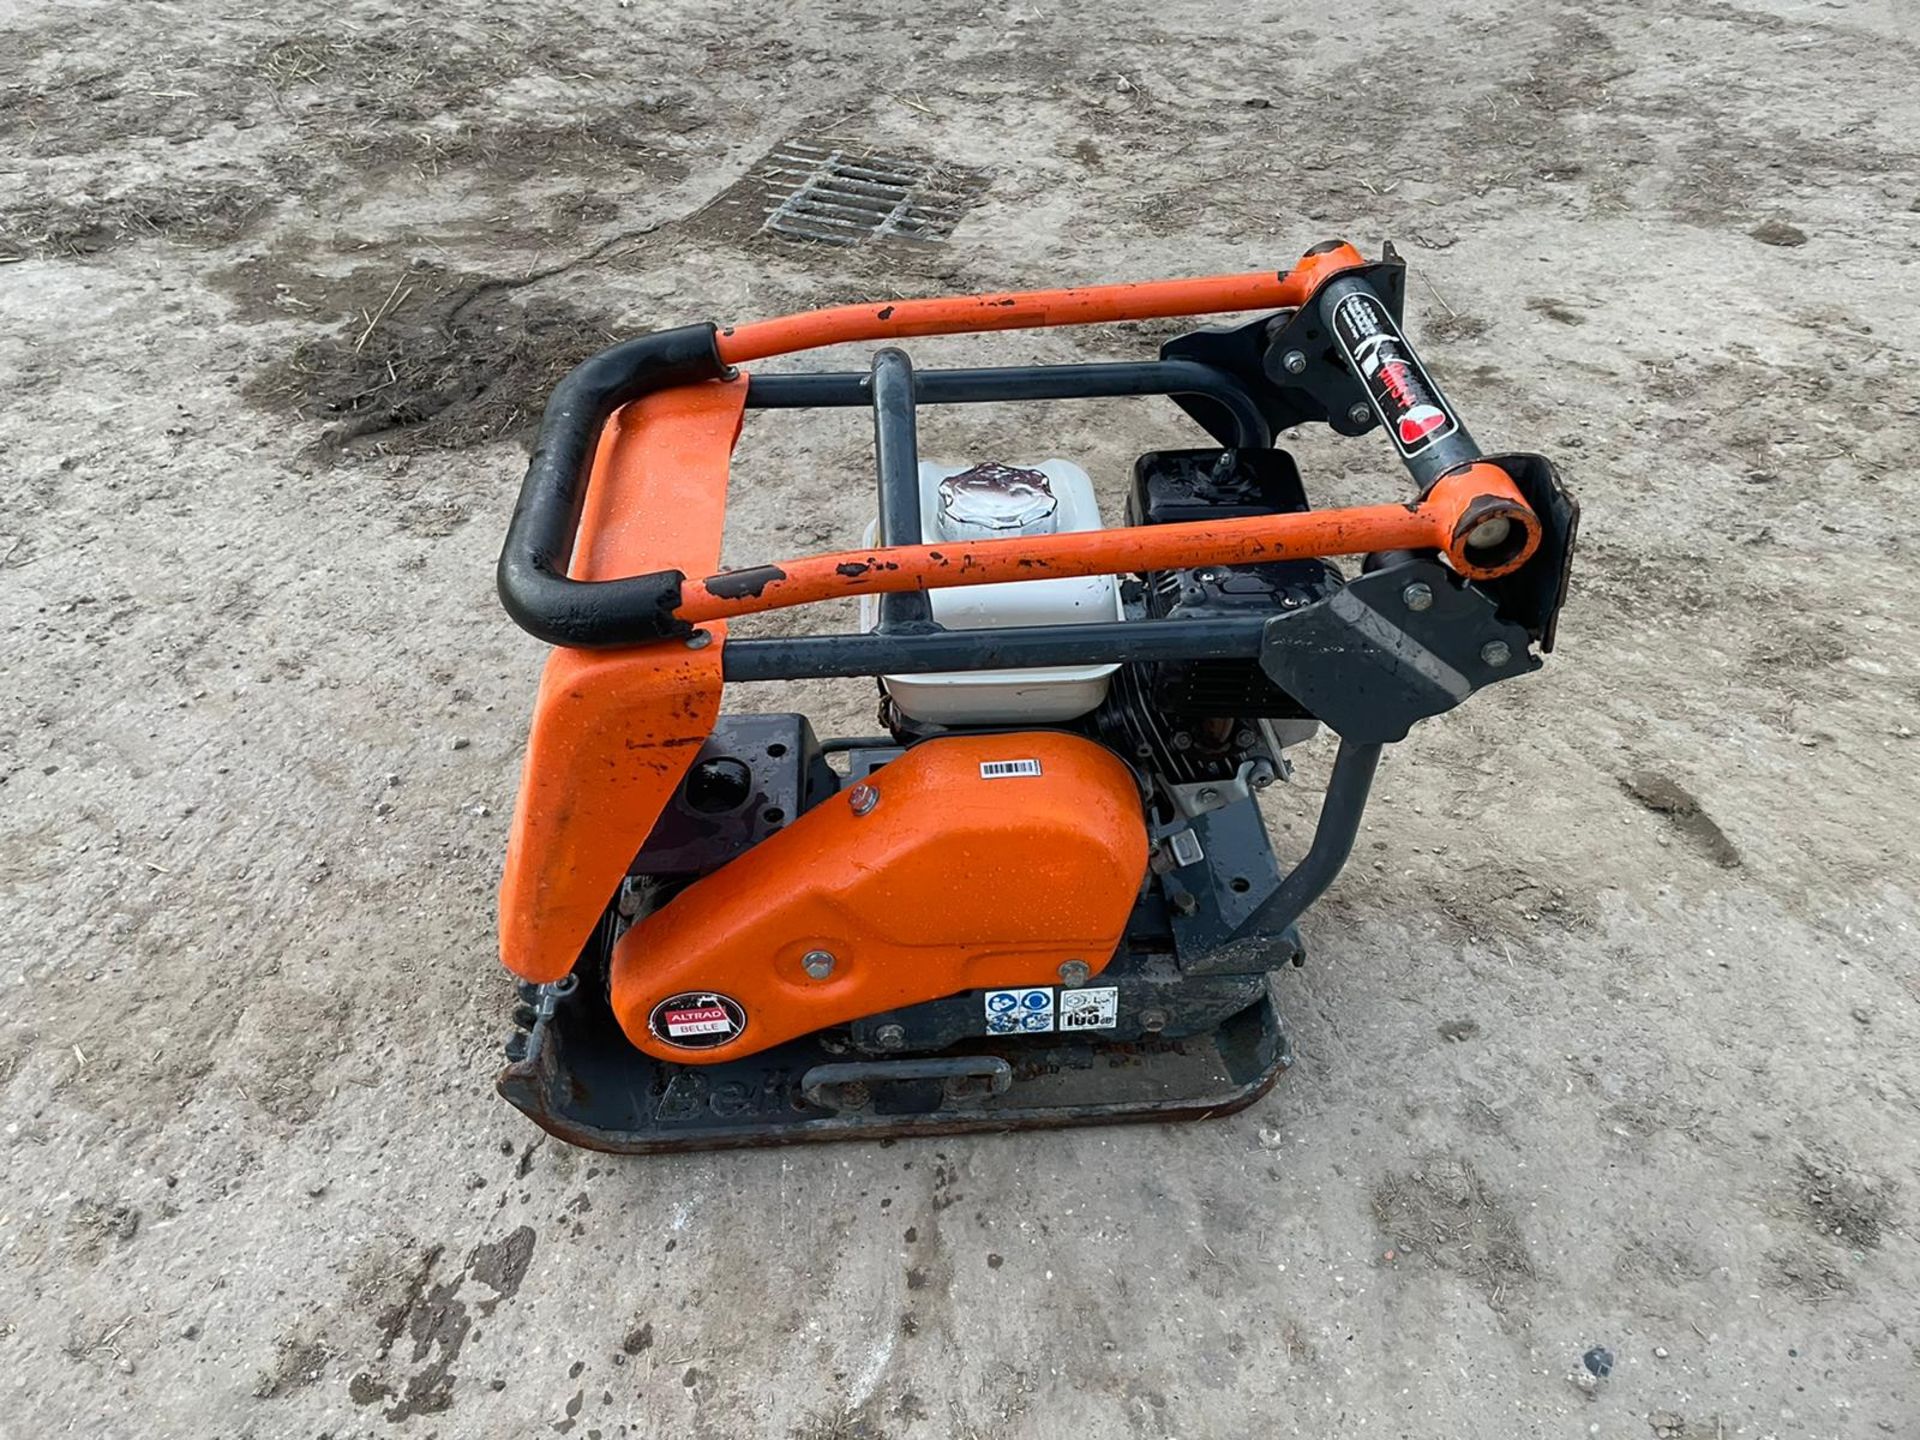 2018 BELLE PCX 13/40 WACKER PLATE, RUNS AND WORKS, IN USED BUT GREAT CONDITION *NO VAT* - Image 3 of 6